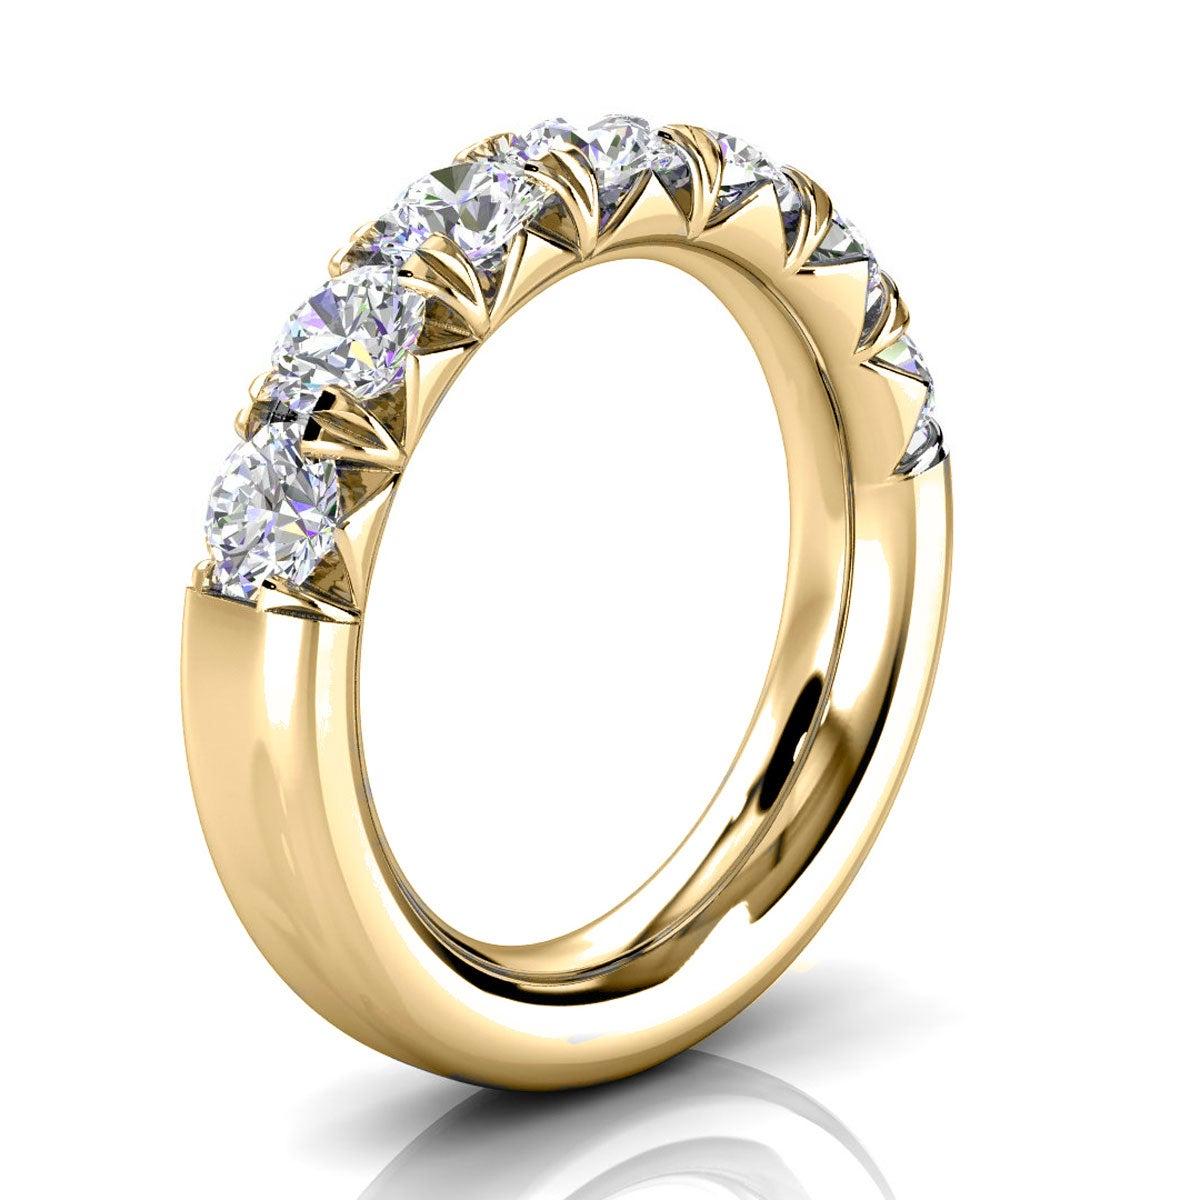 For Sale:  14K Yellow Gold Voyage French Pave Diamond Ring '2 Ct. tw' 2